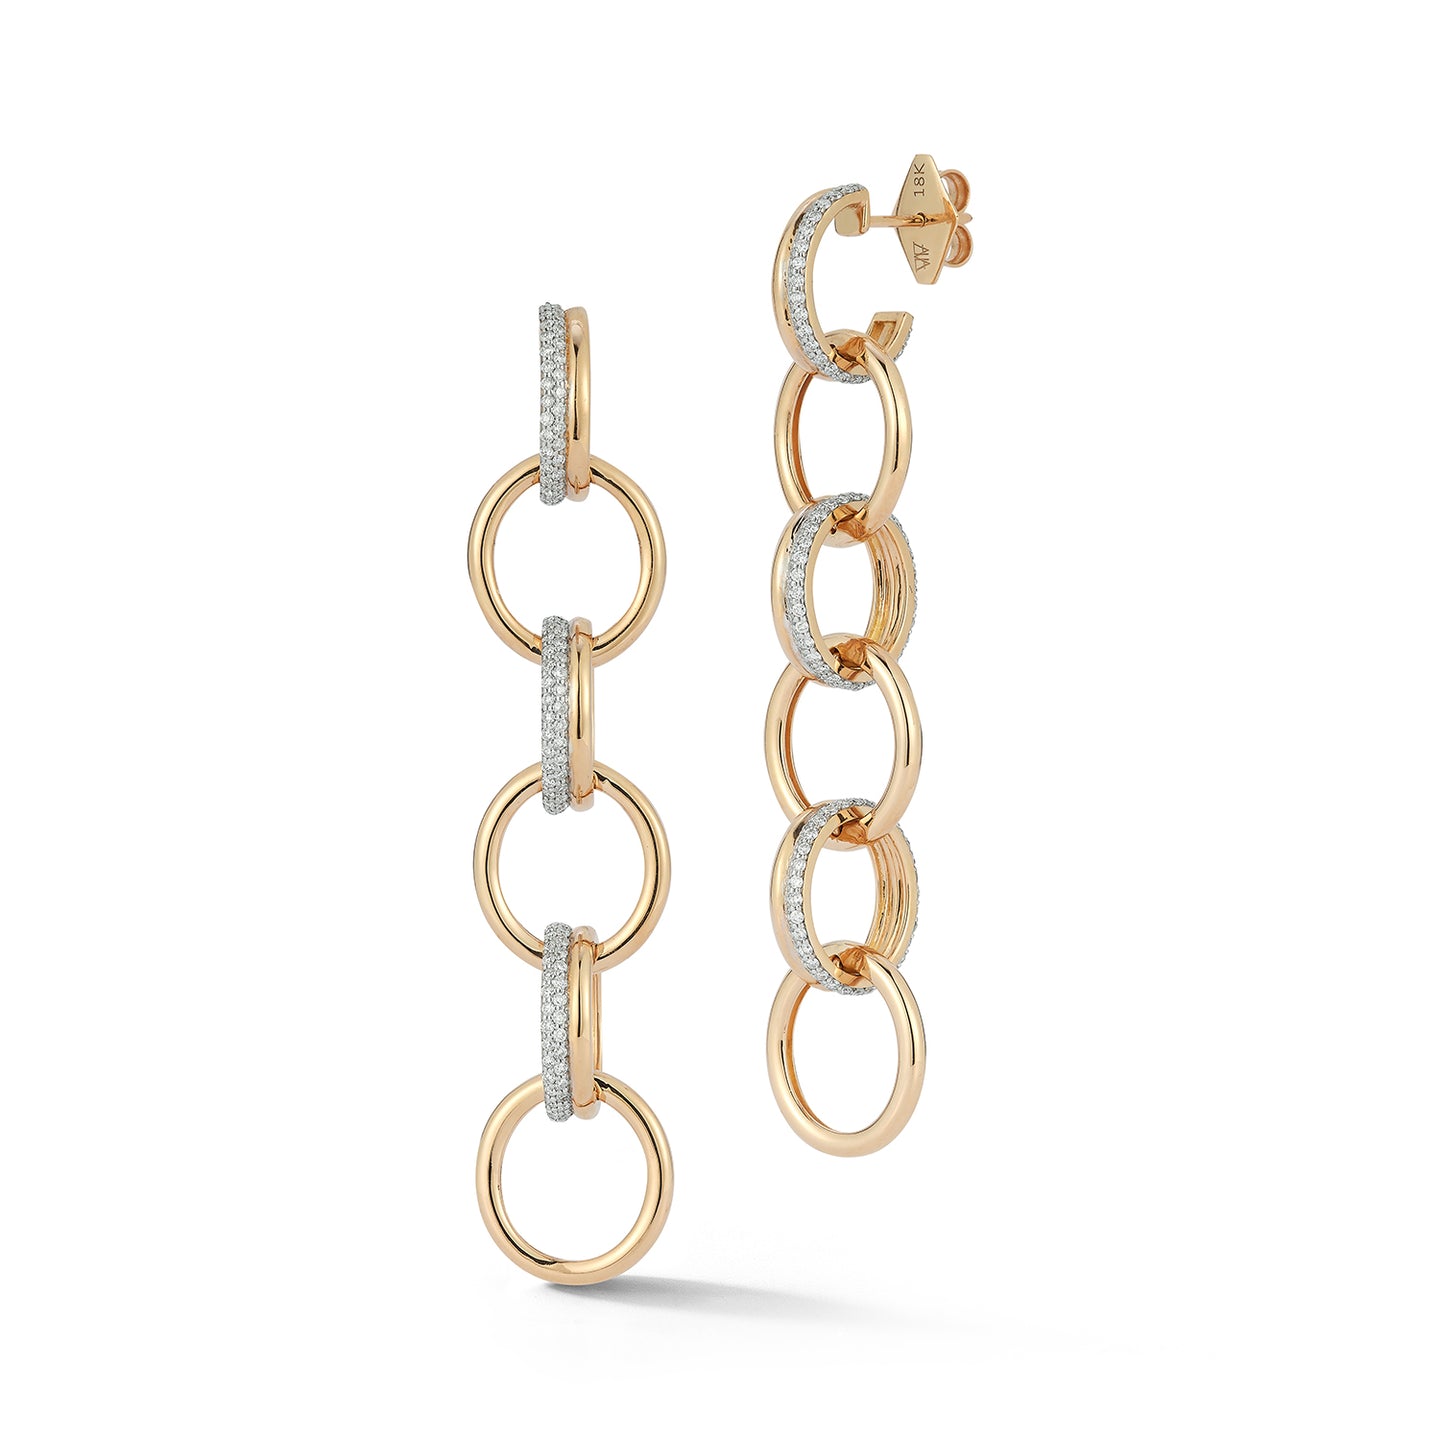 THOBY 18K ROSE GOLD AND DIAMOND 6 LINK DROP EARRINGS